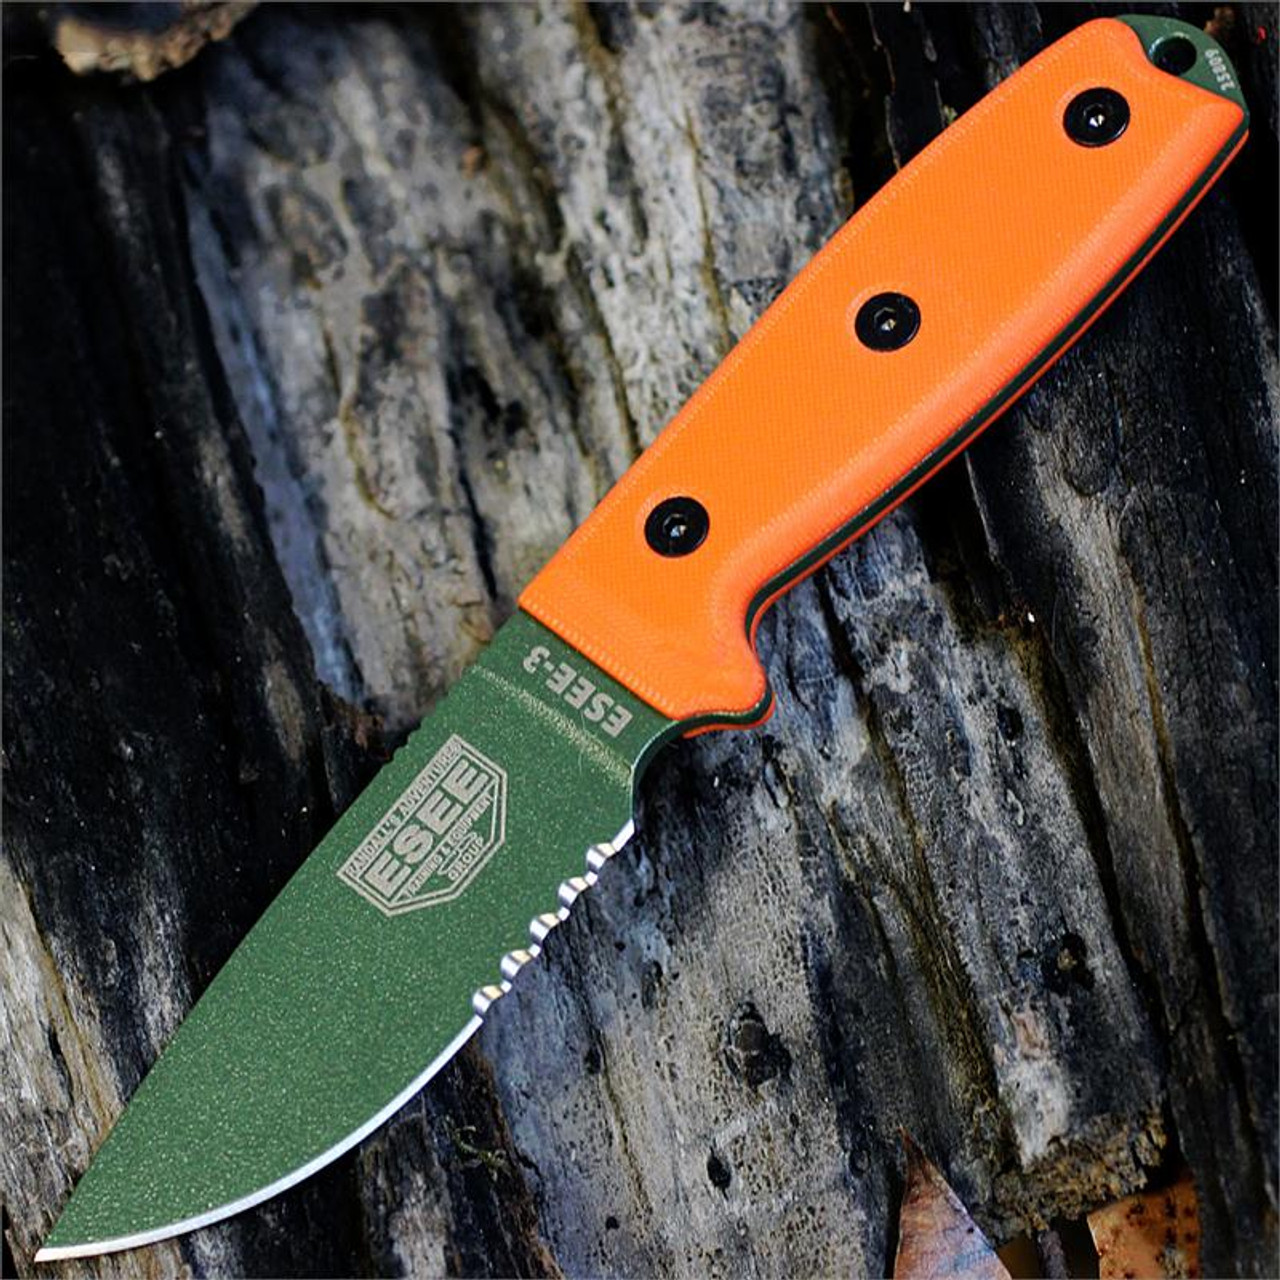 ESEE-3 Fixed Blade Knife (ESEE-3SM-OD)- 3.88" OD Green 1095 Partially Serrated Drop Point Blade, Orange G-10 Handle | Modified Pommel